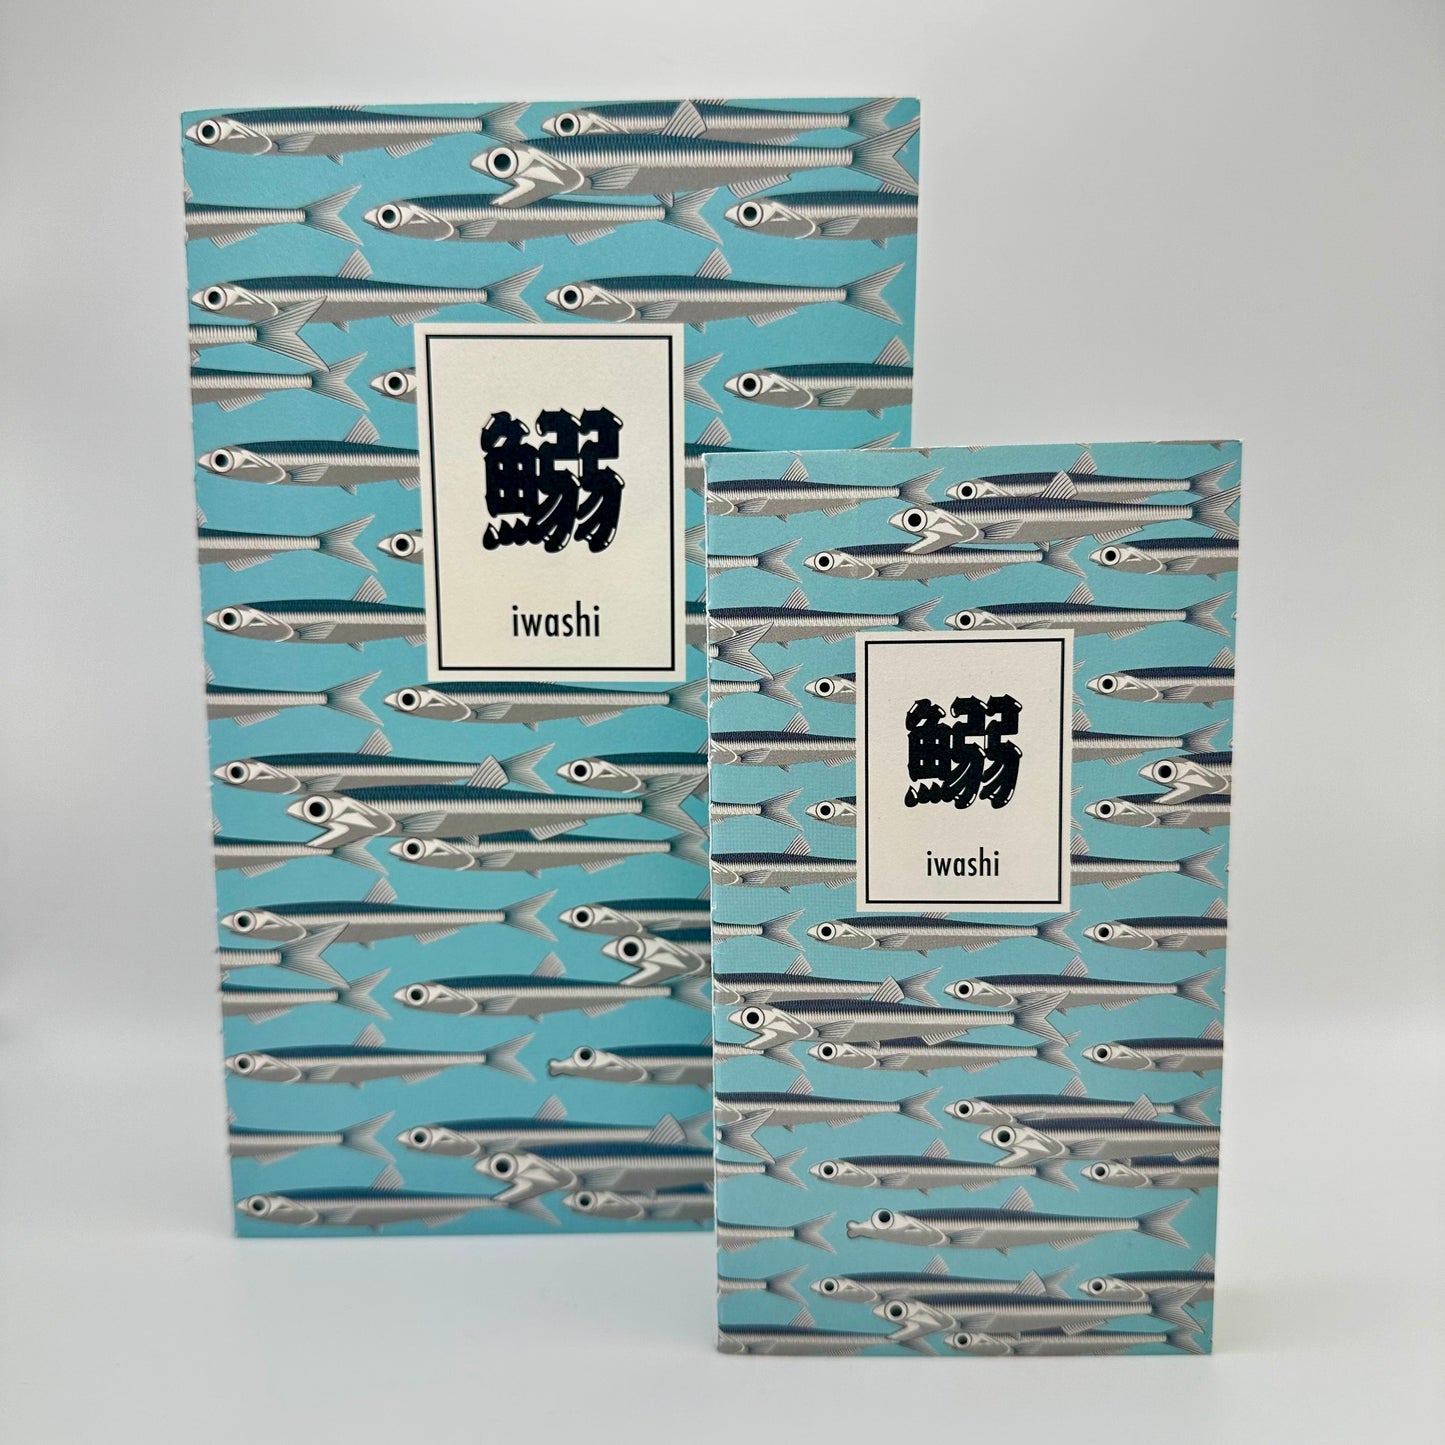 Two notebooks side by side Blue background with silver sardines swimming. Text box in Japanese that reads "Iwashi"